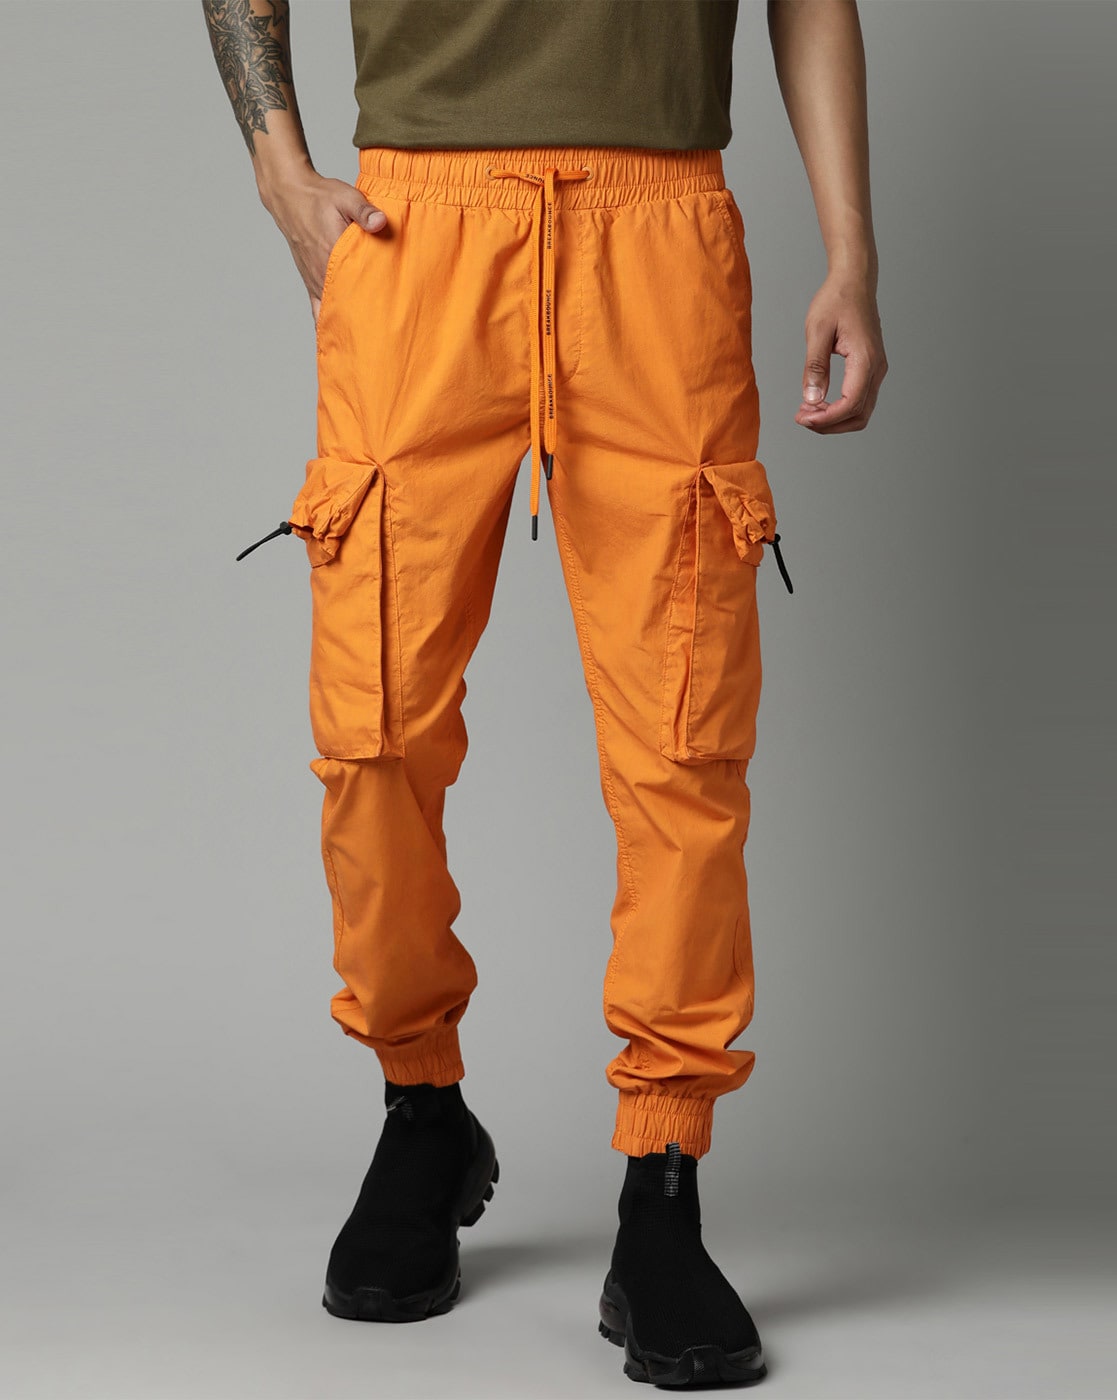 Solly Jeans Co Trousers  Chinos Allen Solly Orange Trousers for Men at  Allensollycom